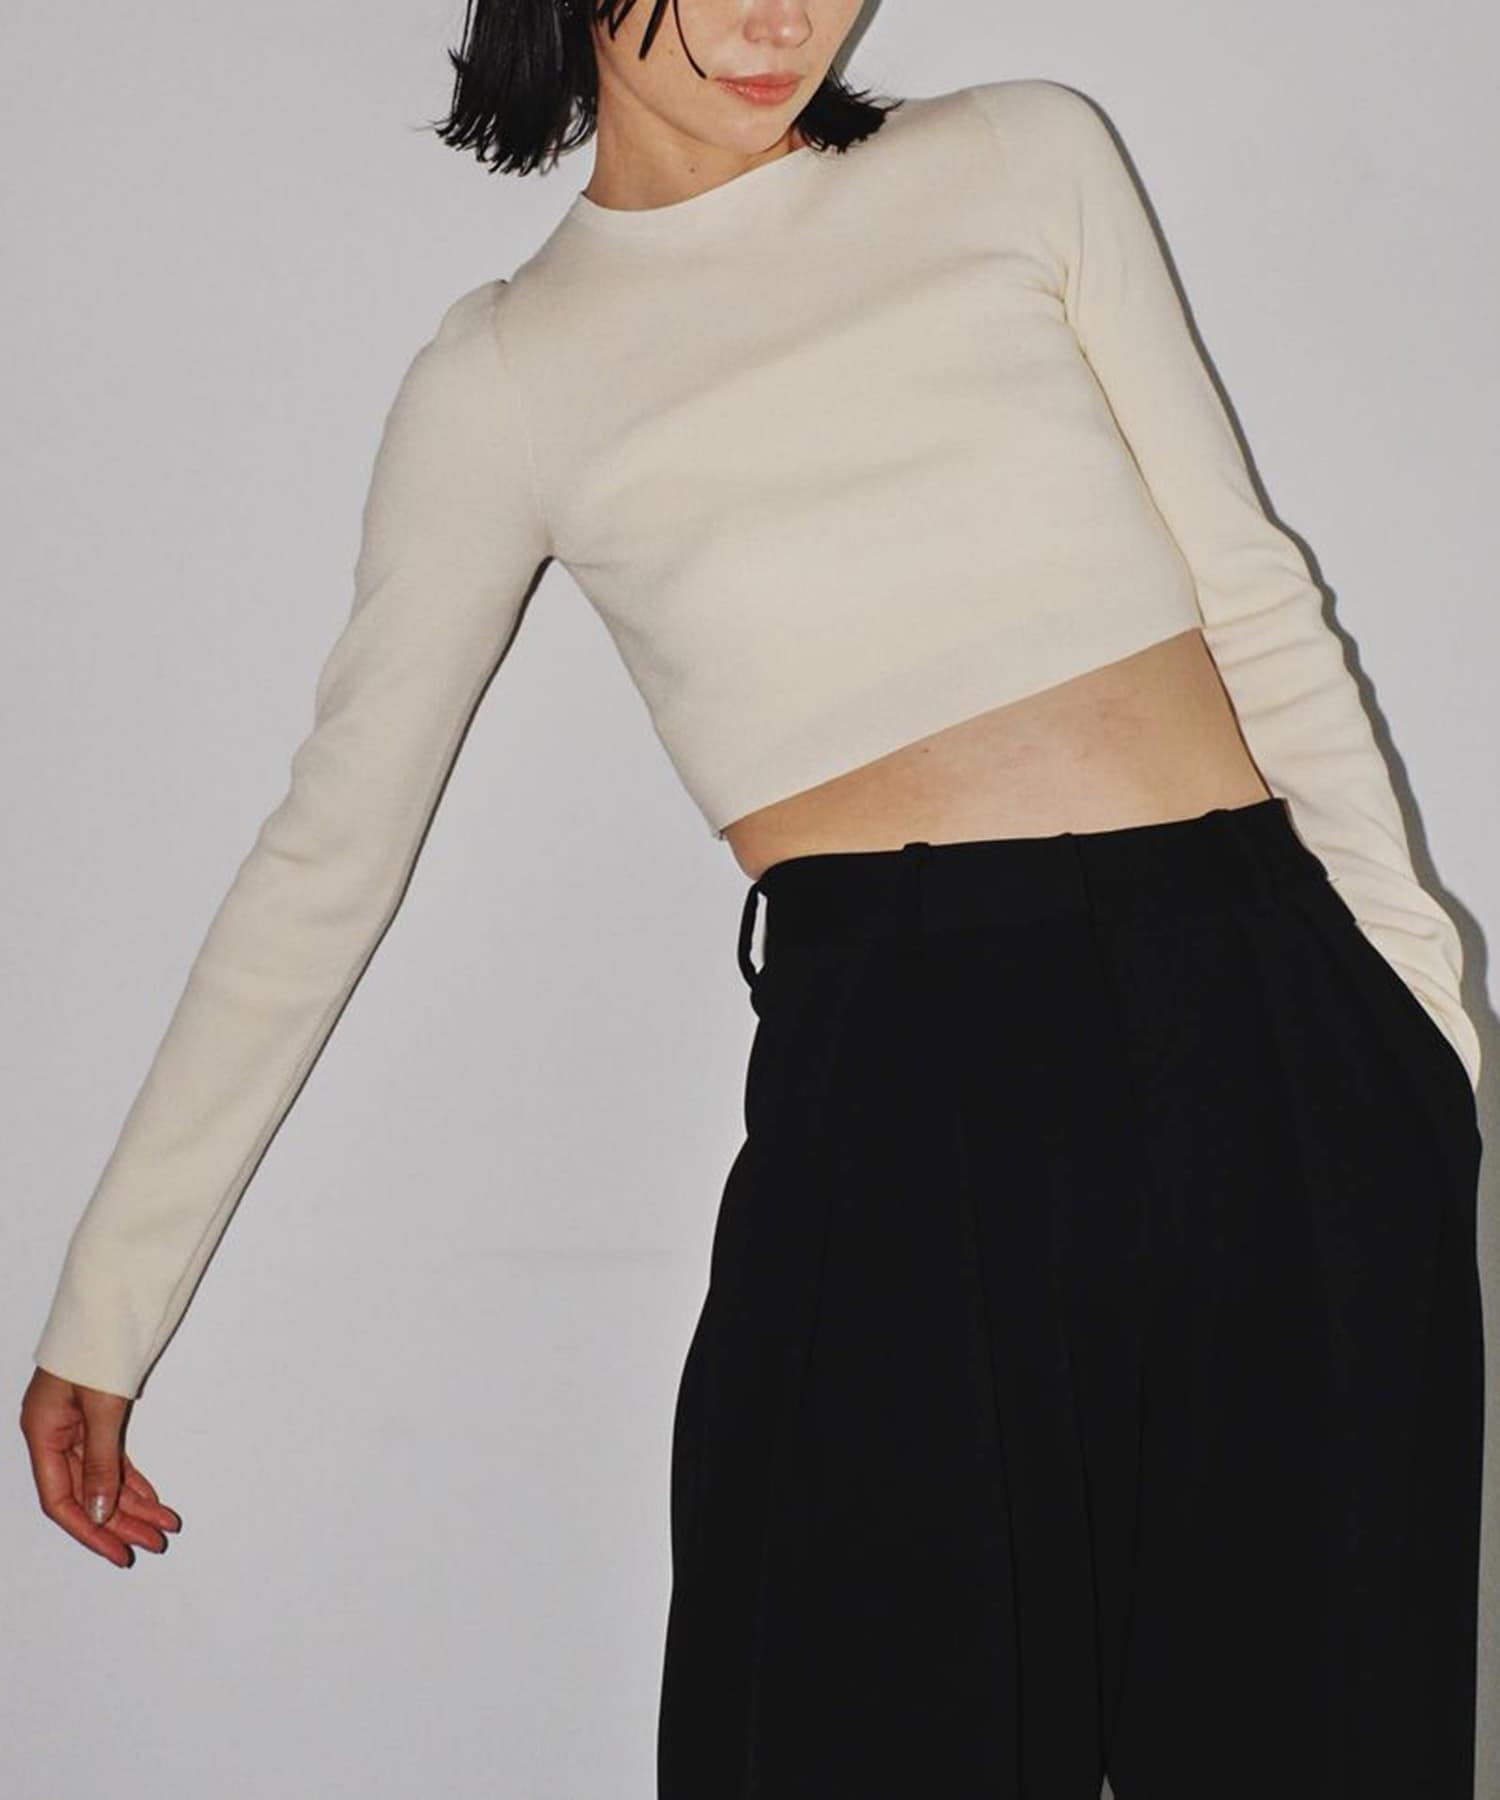 Cropped Smooth Knit